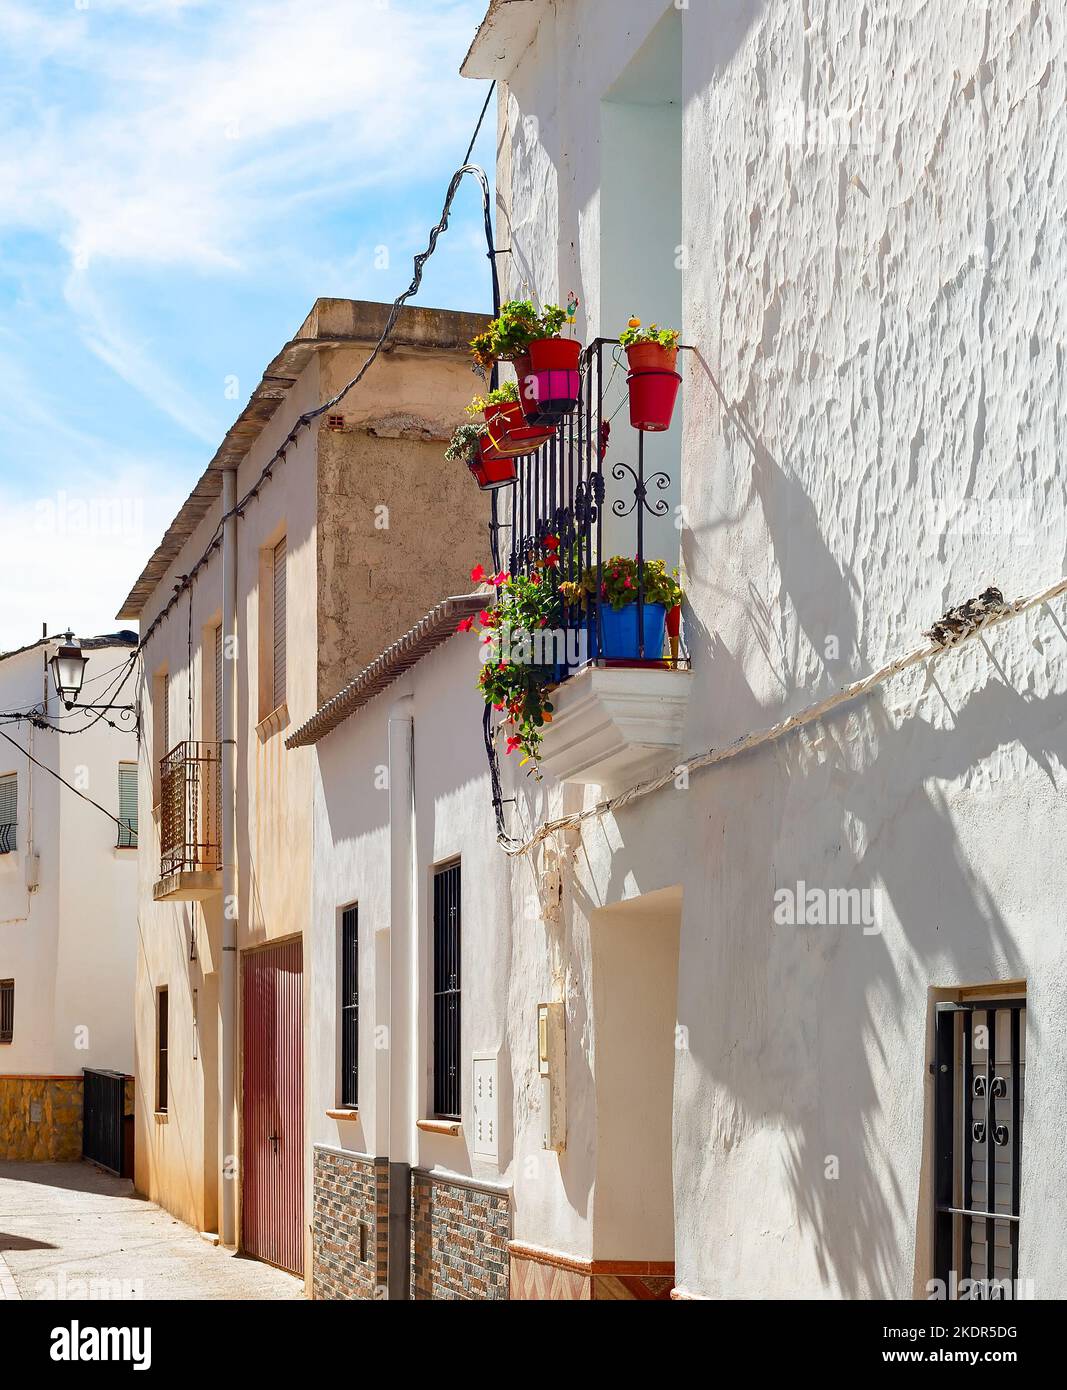 Old town street curve, white houses, traditional architecture, Darrical, Spain Stock Photo